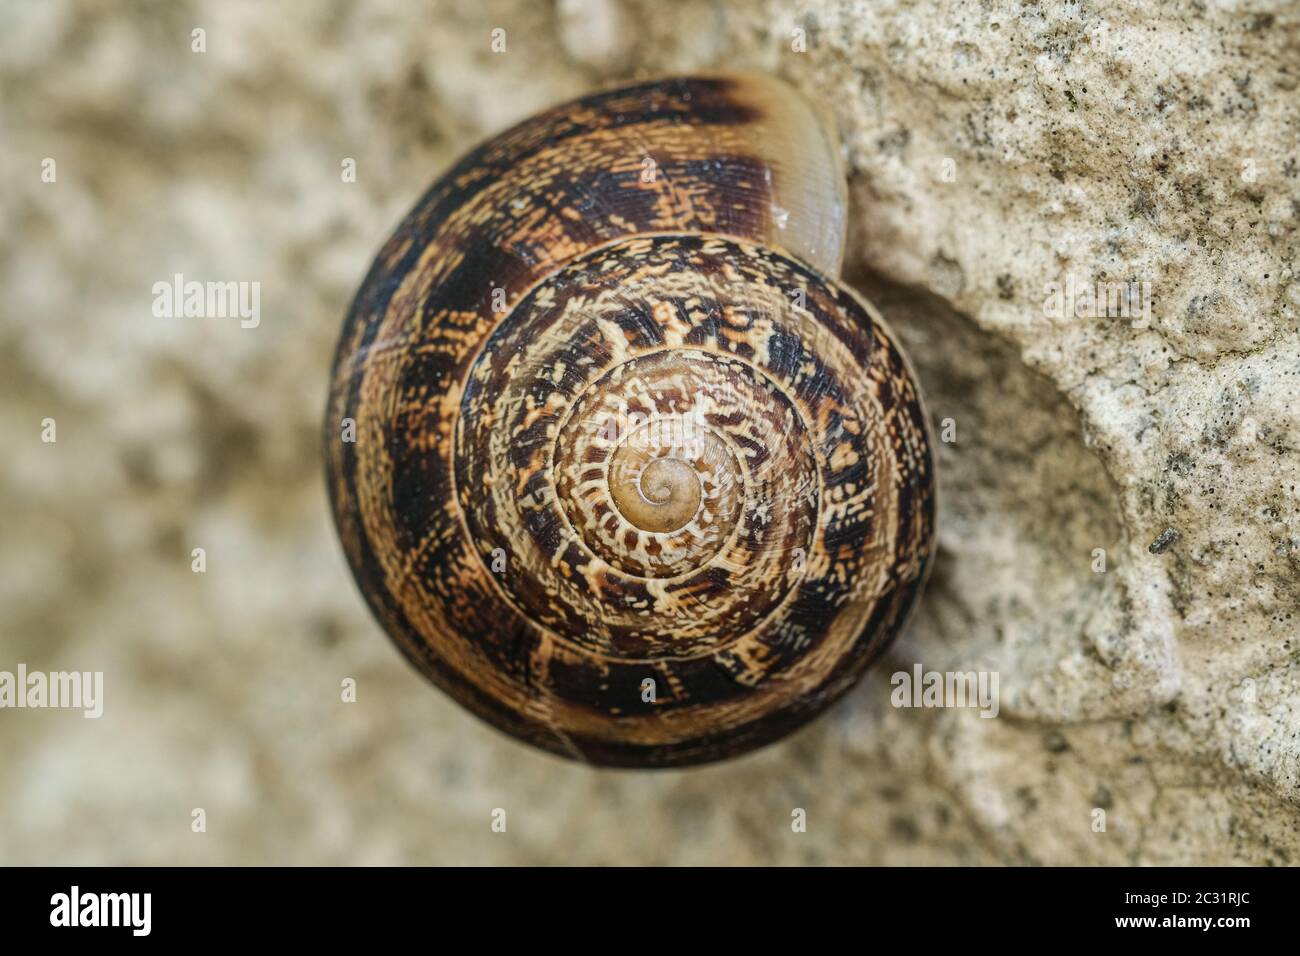 Helix snail close up,golden section spriral geometry shell details,animal nature Stock Photo